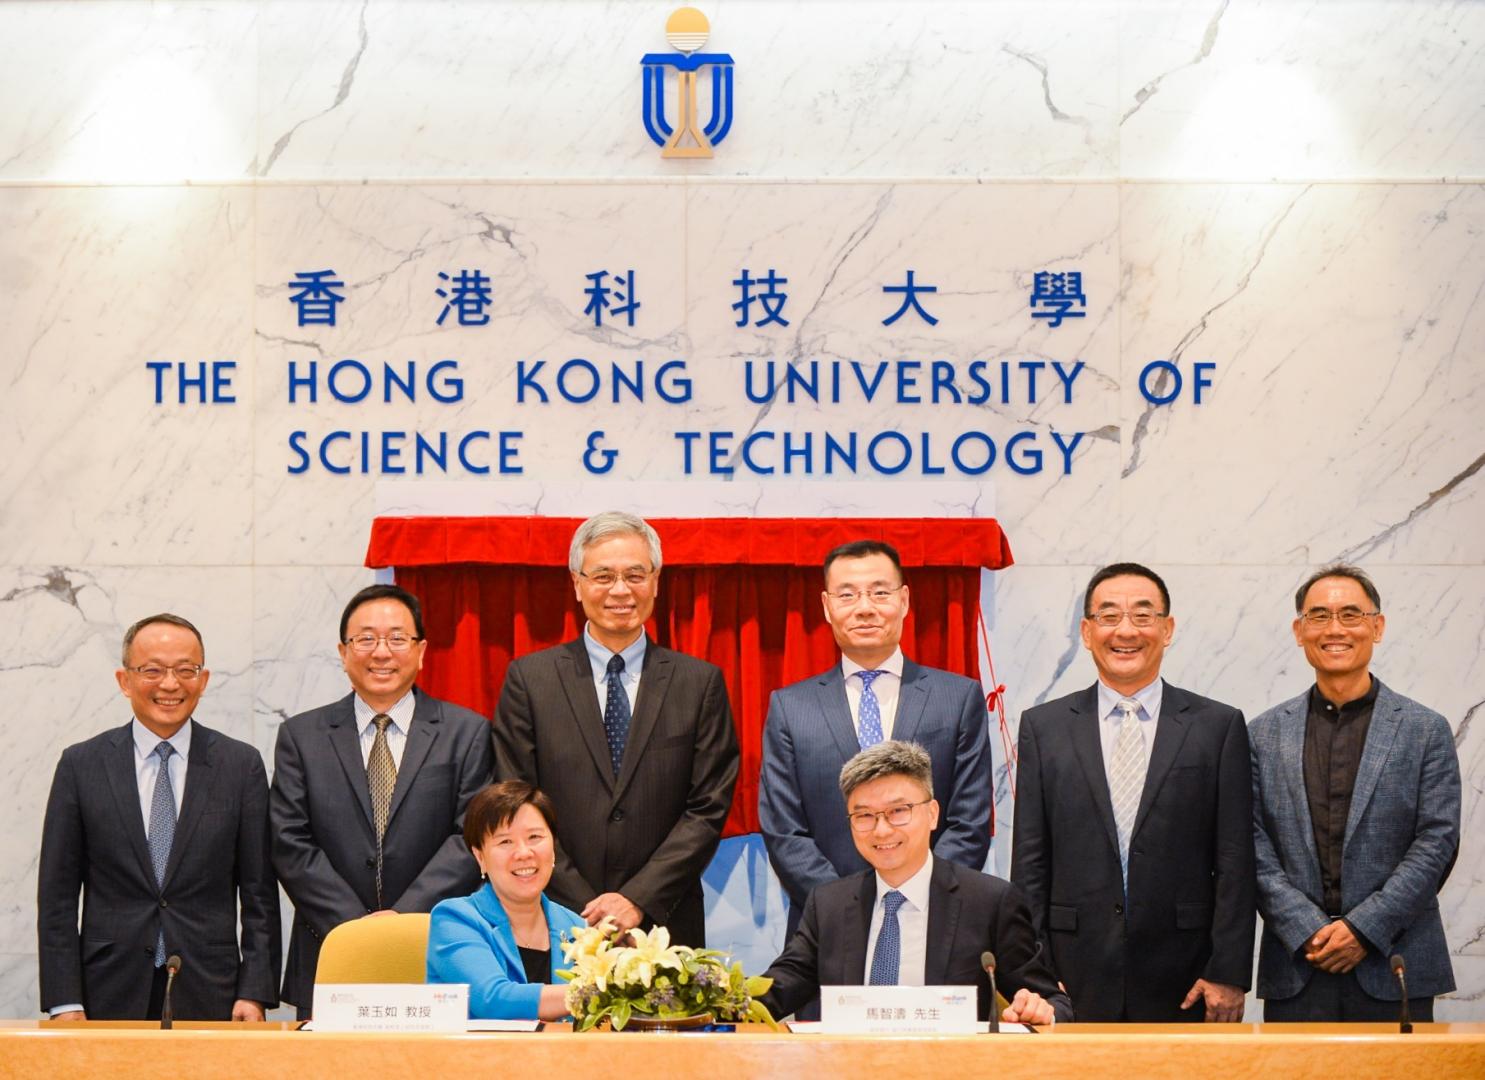 Prof. Nancy IP (front left), HKUST Vice-President for Research and Development, and Mr. Henry MA (front right), Executive Vice-President and Chief Information Officer of WeBank sign the agreement.